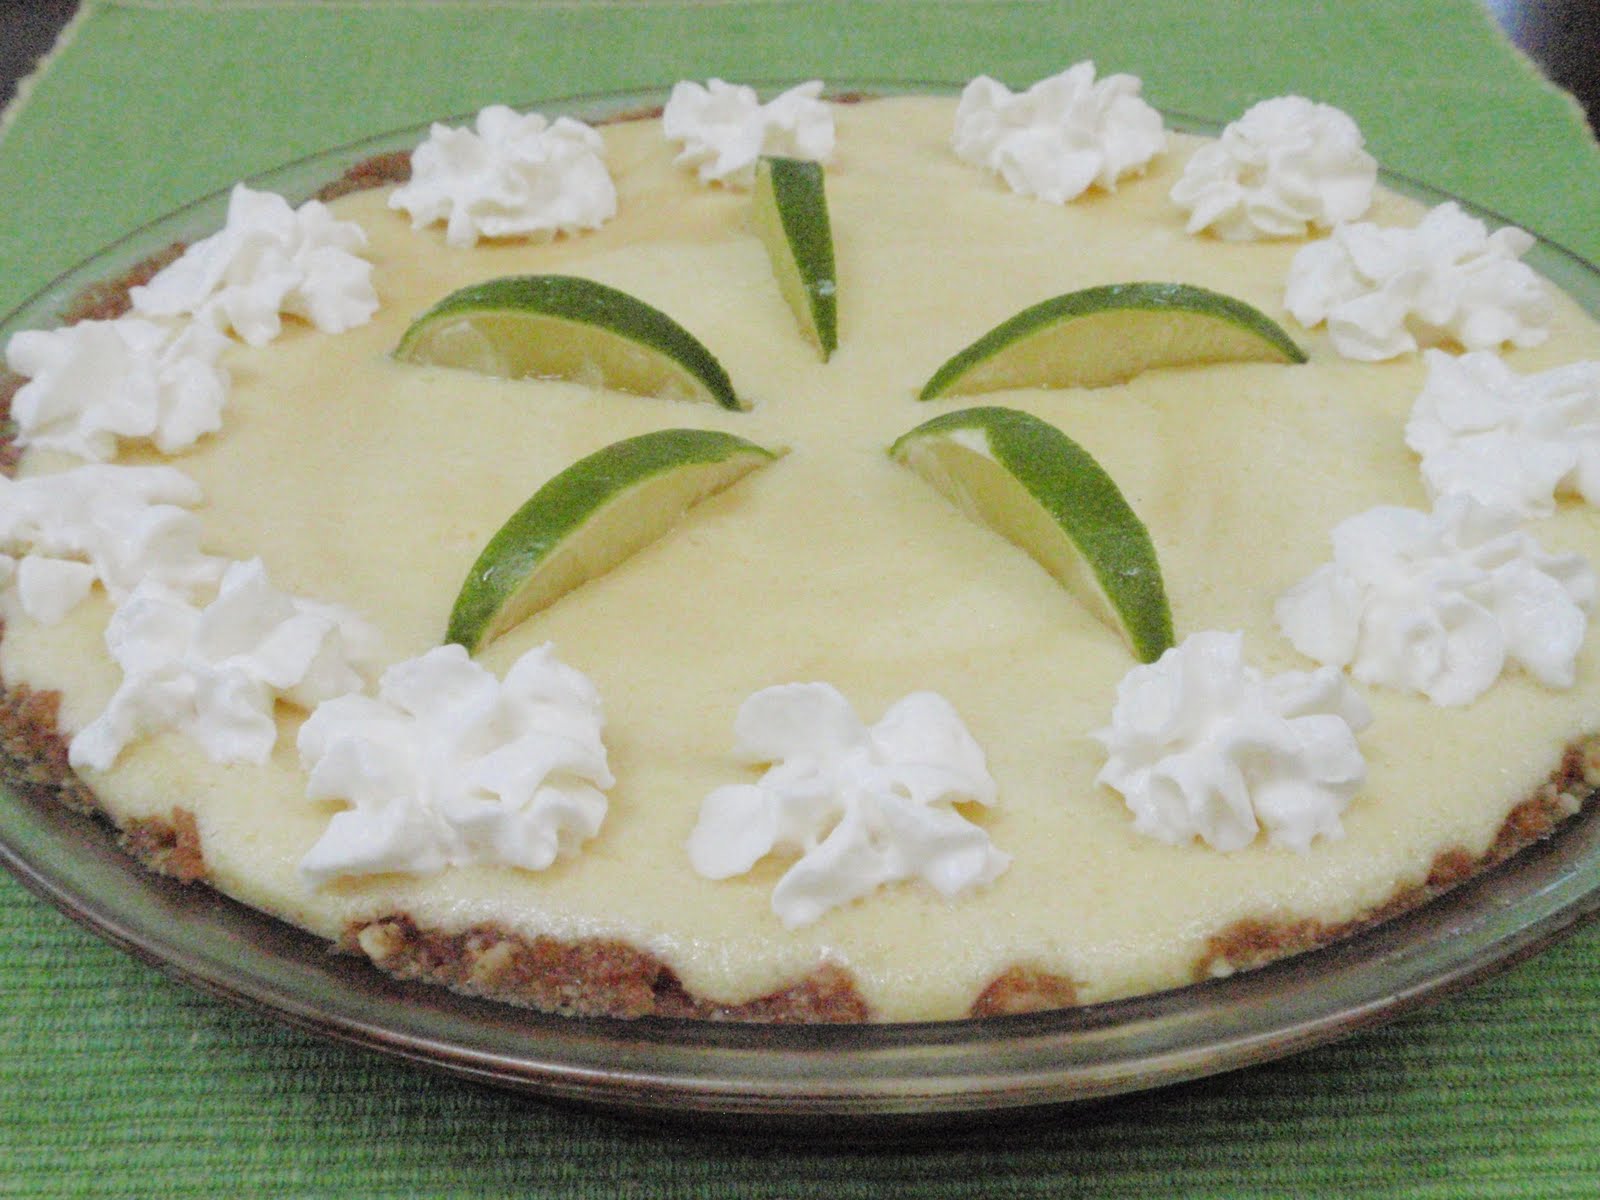 ... 42 key lime pie especially when it s real key lime pie and it s the